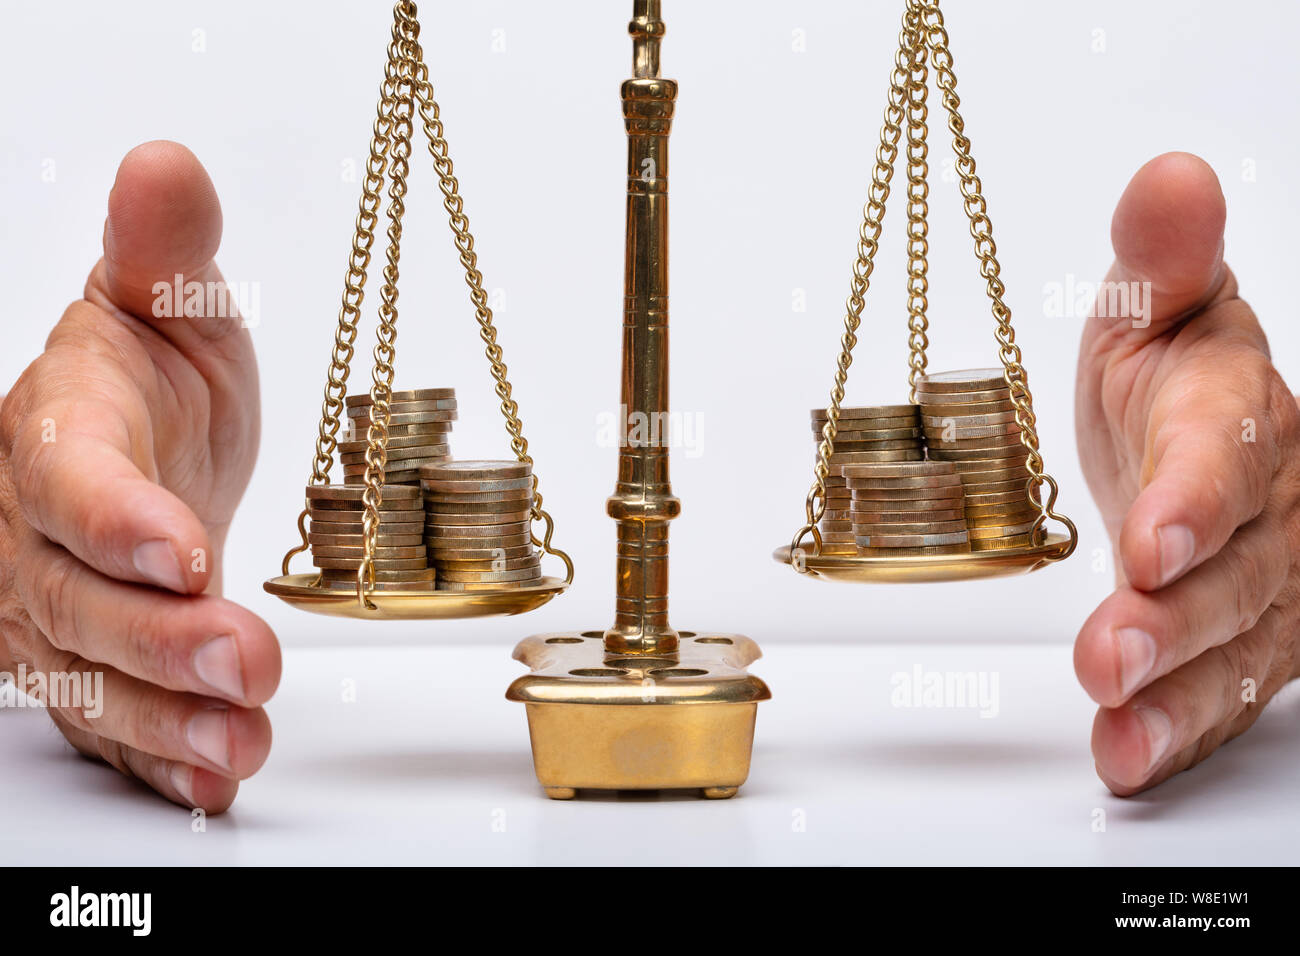 Close-up Of A Businessperson's Hand Covering Stacked Coins On Golden Weighing Scale Stock Photo